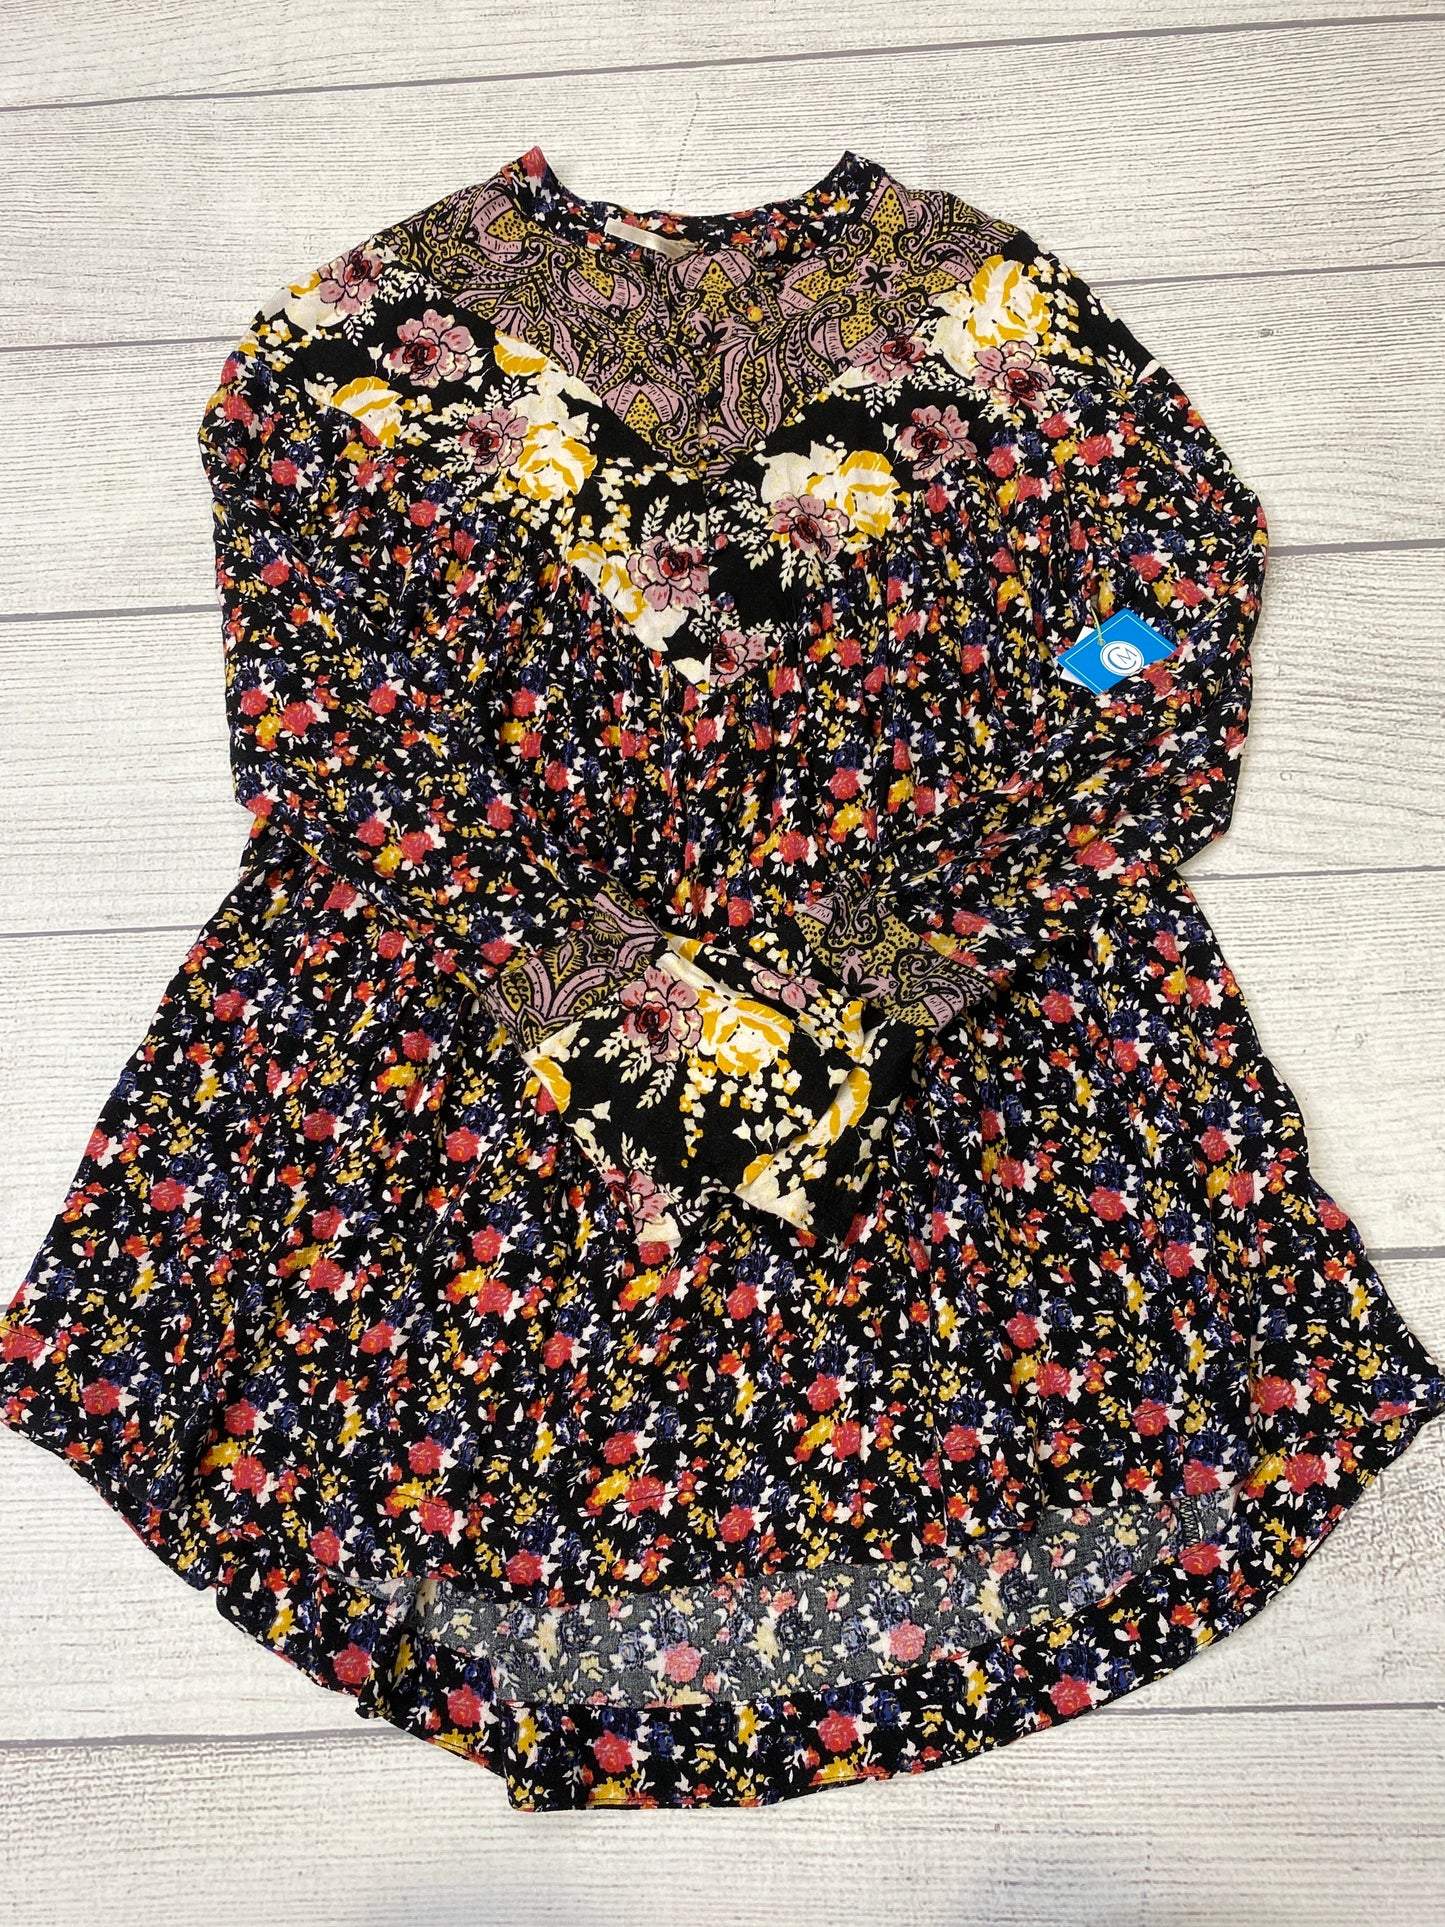 Black Floral Top Long Sleeve Free People, Size Xs